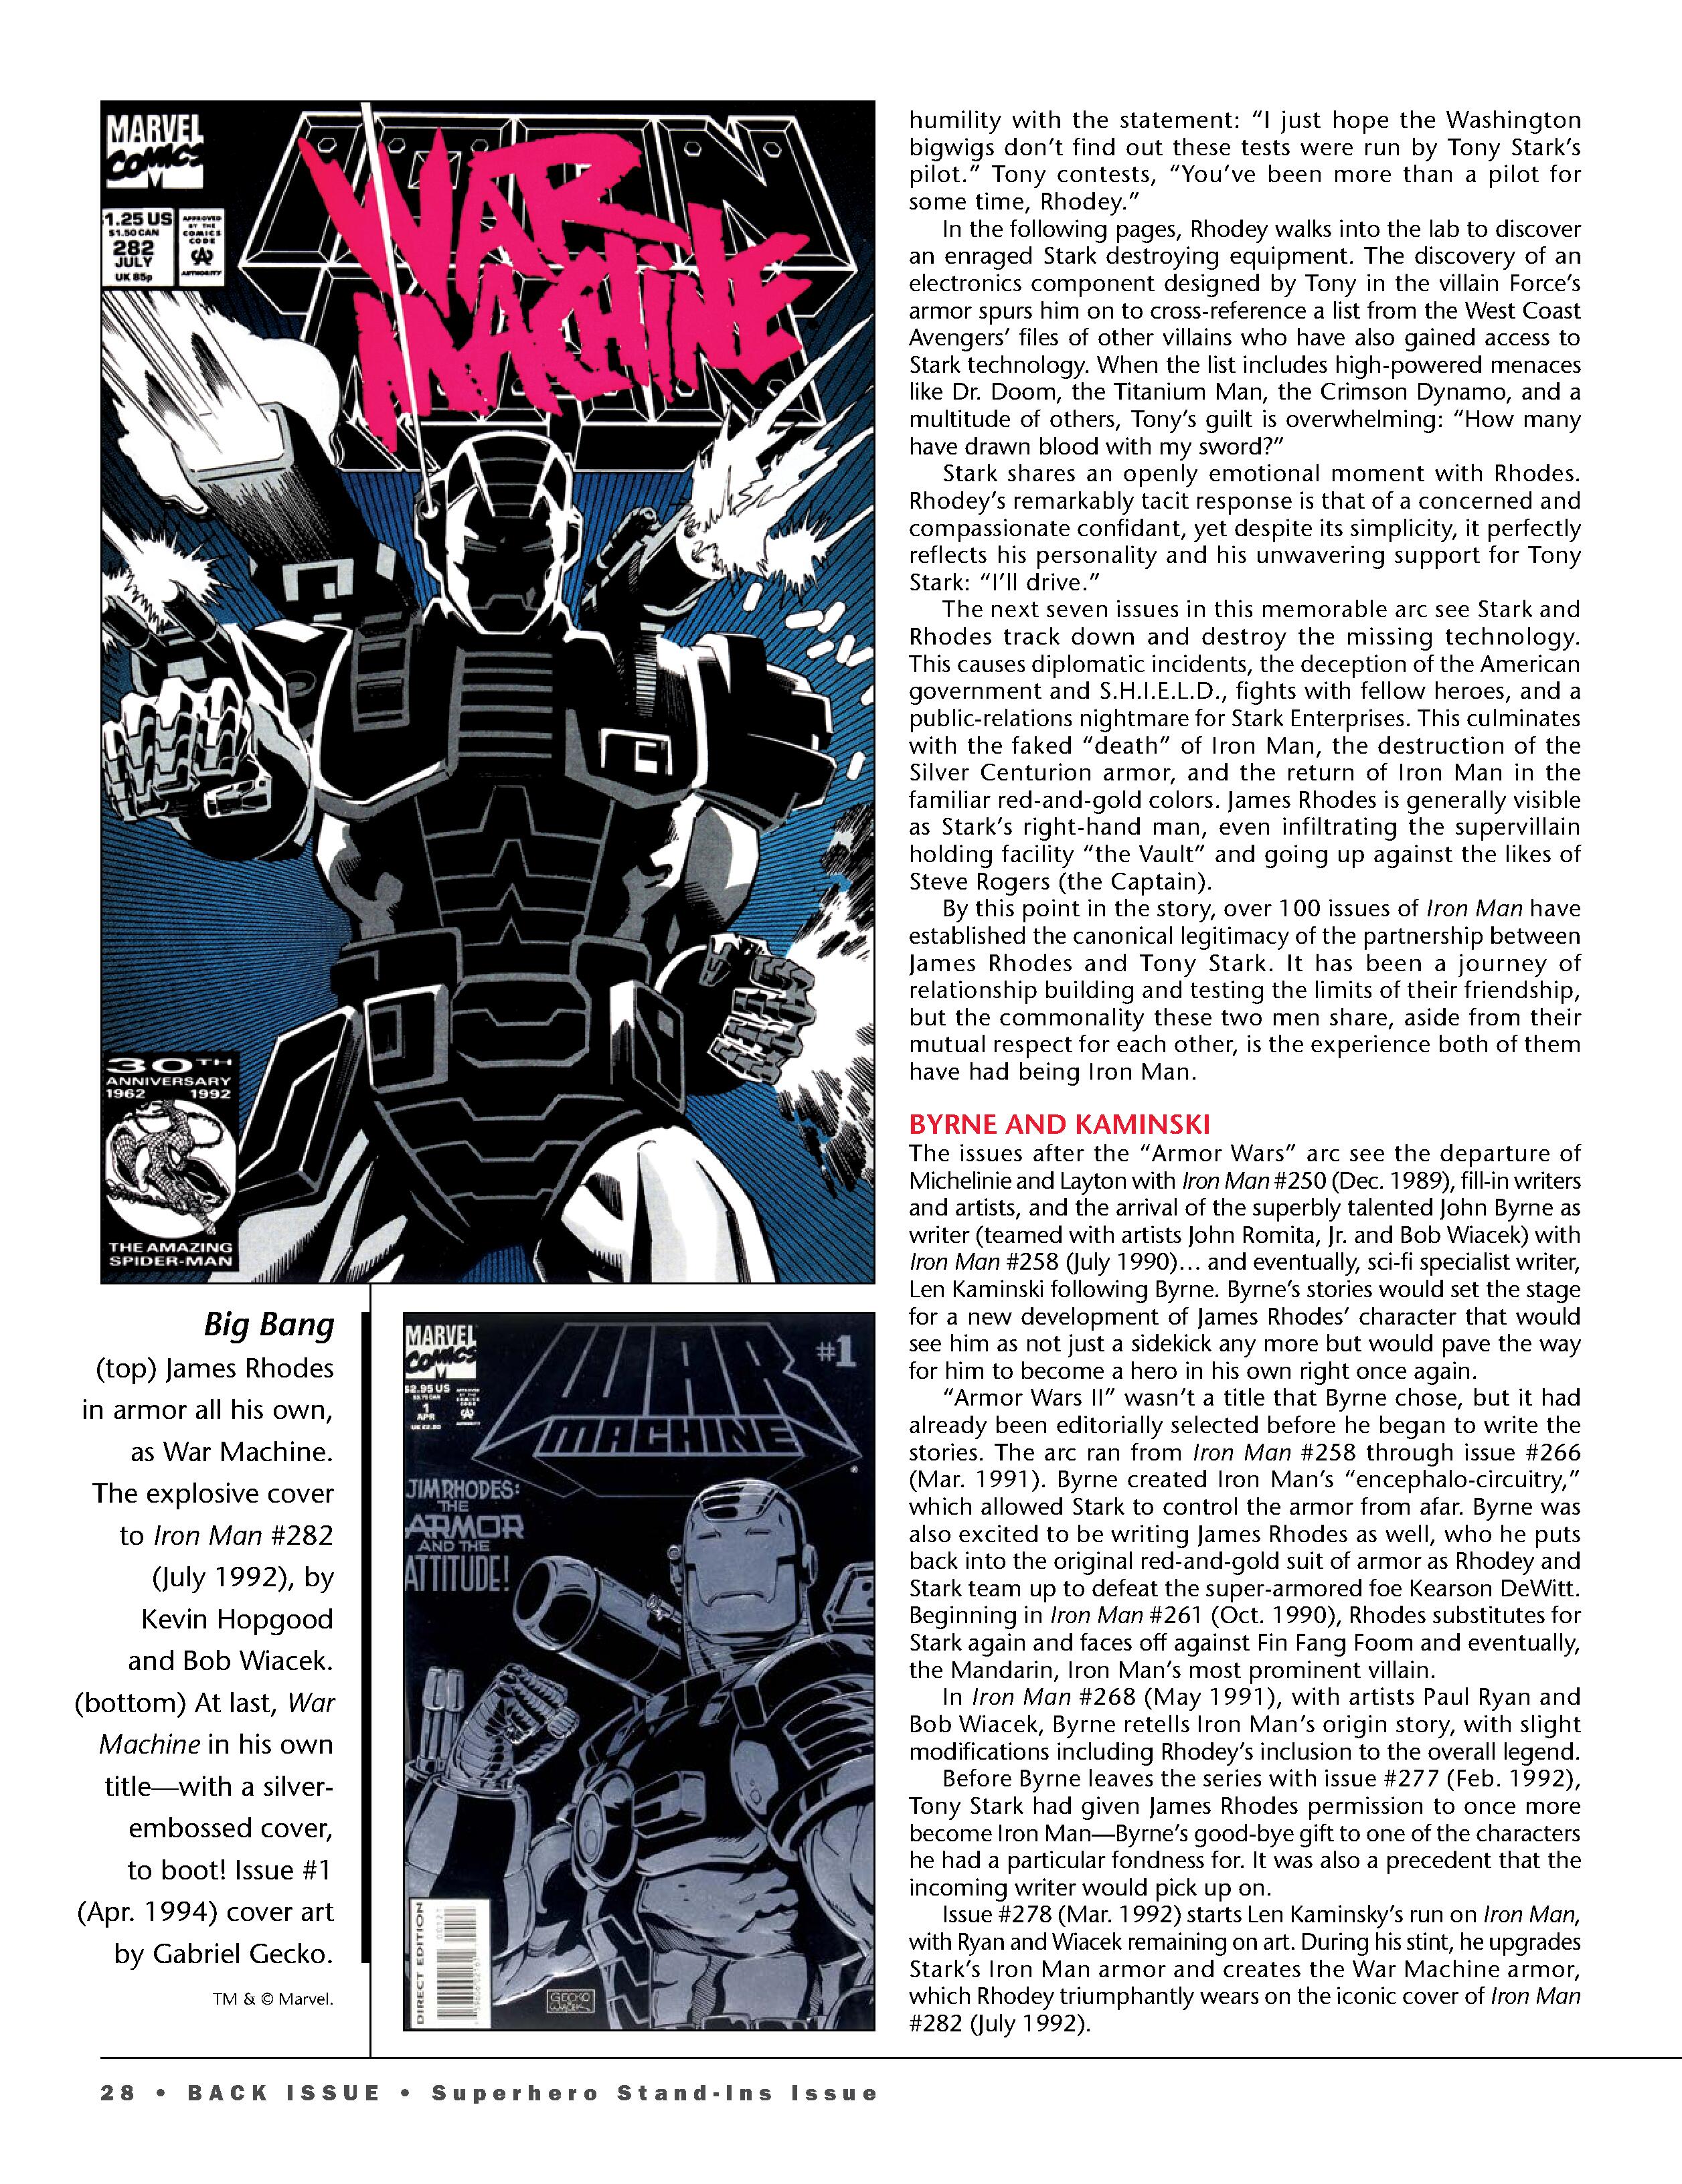 Read online Back Issue comic -  Issue #117 - 30